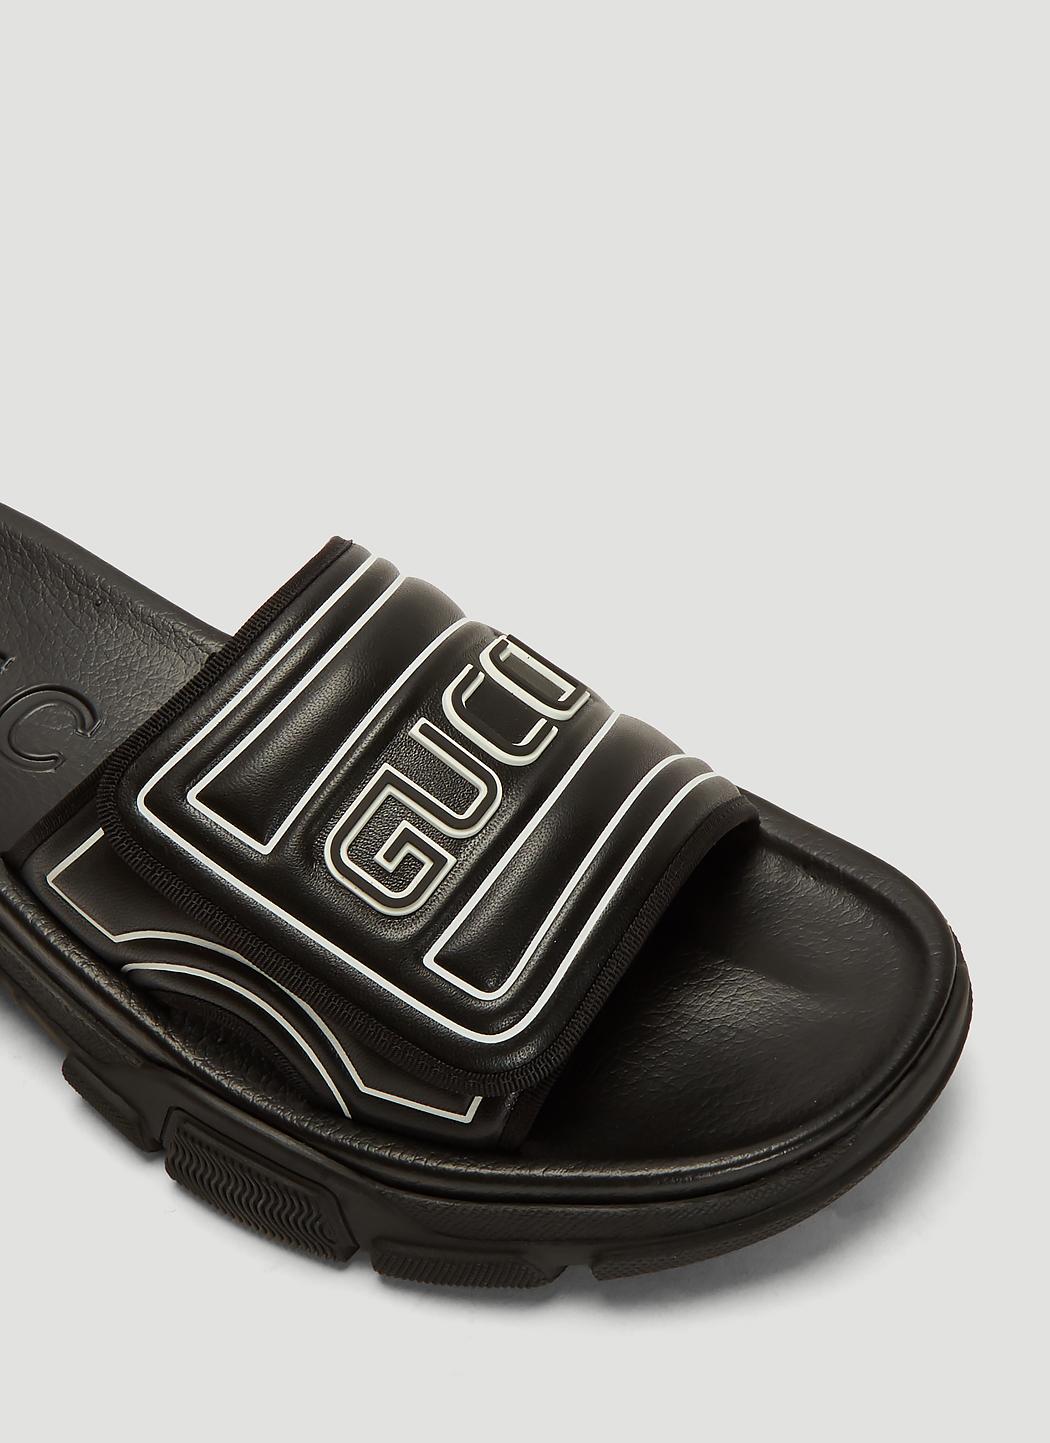 Gucci Logo Chunky Sliders in Black for Men - Save 3% - Lyst